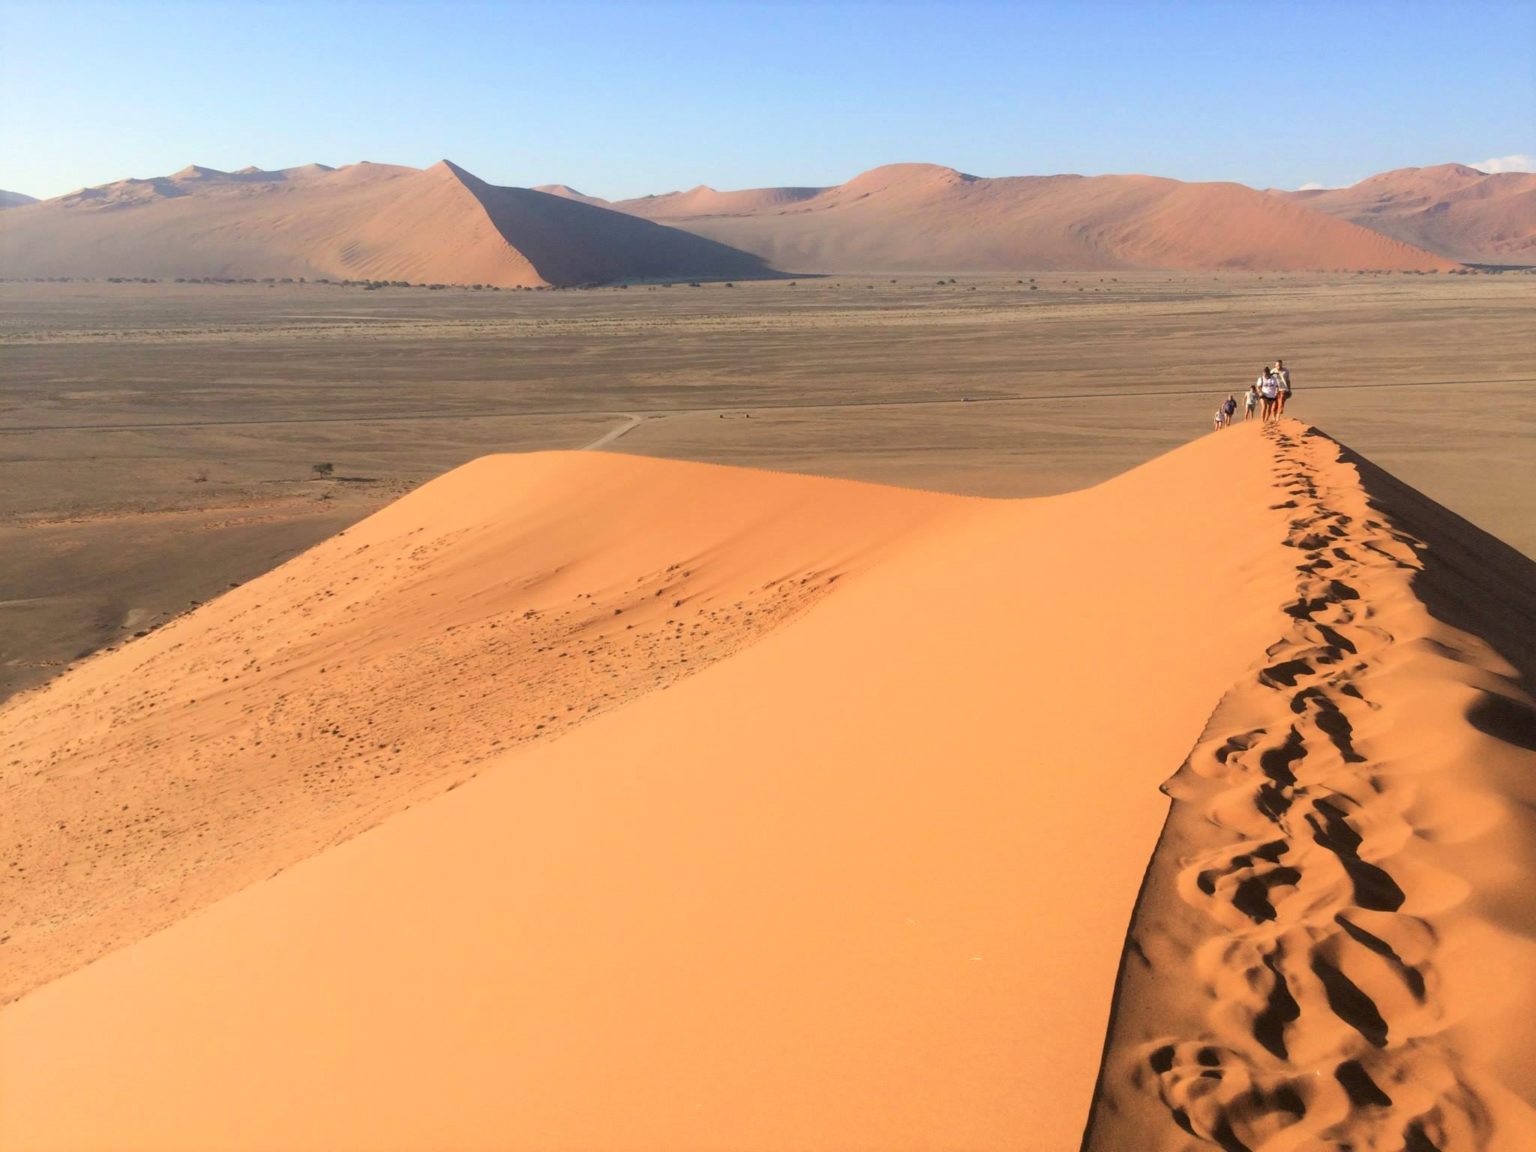 on top of Dune 45 with footprints in the foreground and people walking up in the baackground on our Namibia safari